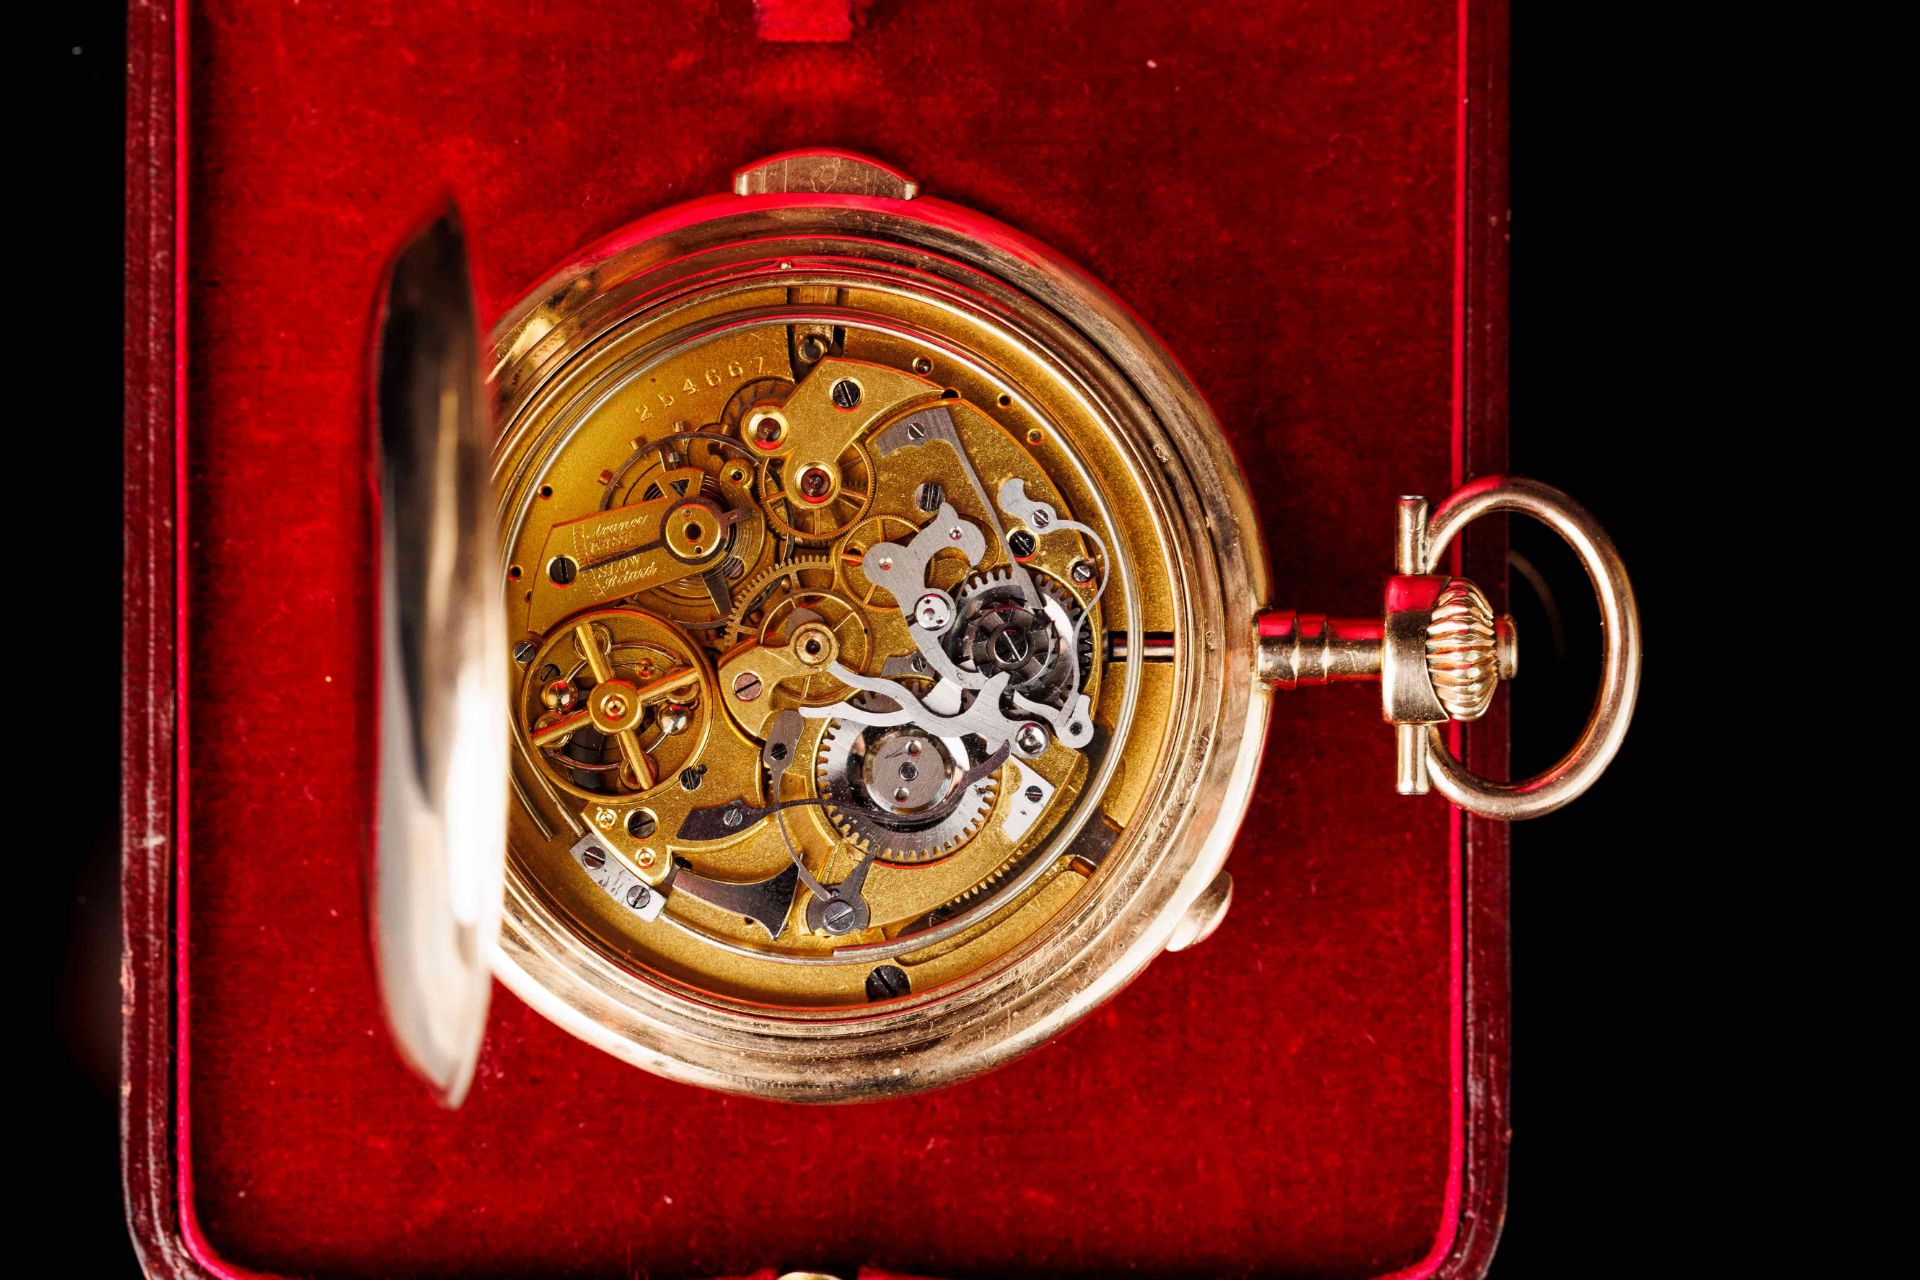 Antique Gold Pocket Watch with Chime in a Case. Geneva. Switzerland. - Image 7 of 9